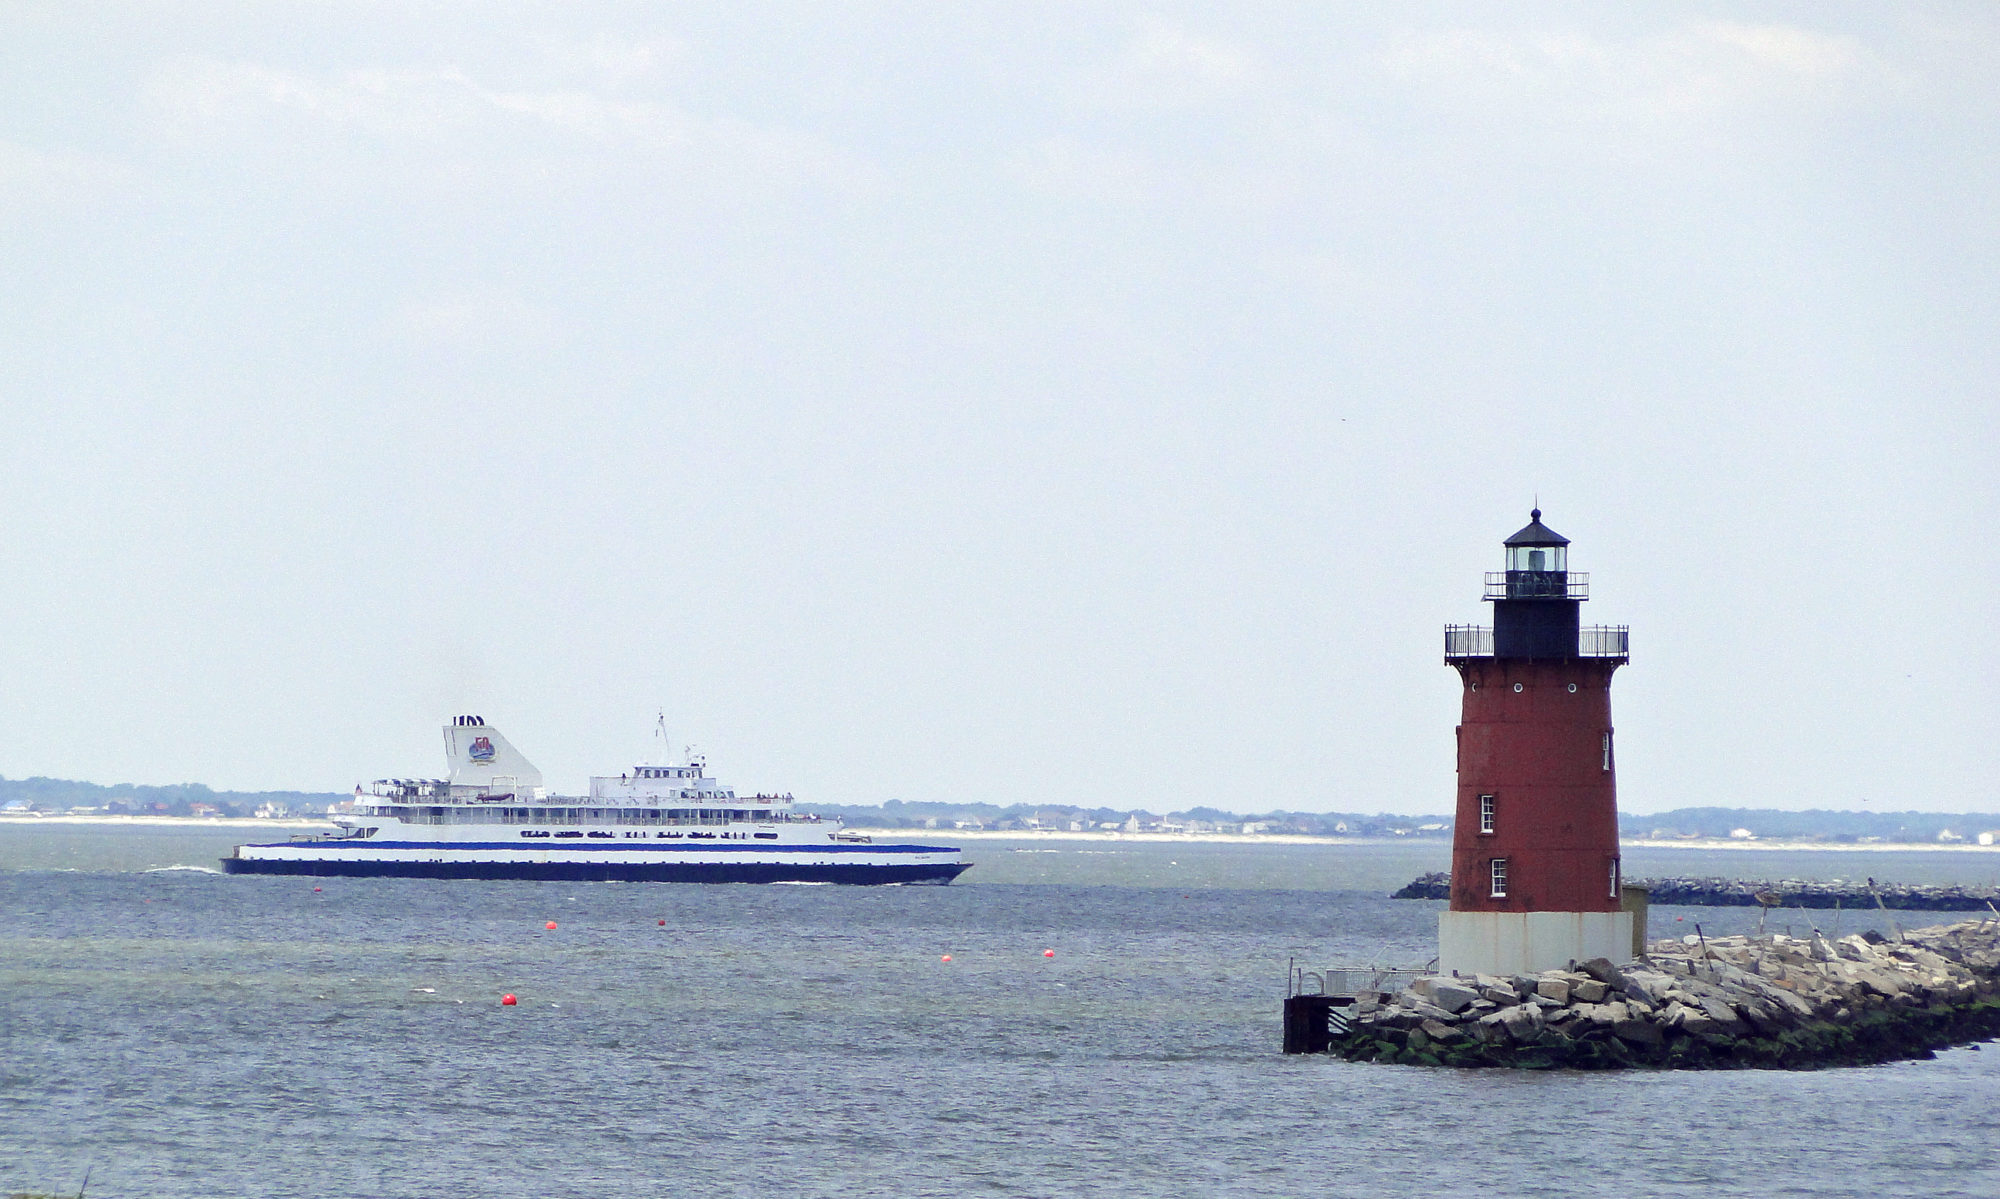 Ferry shuttle boat seen going by iconic red lighthouse near Lewes, DE